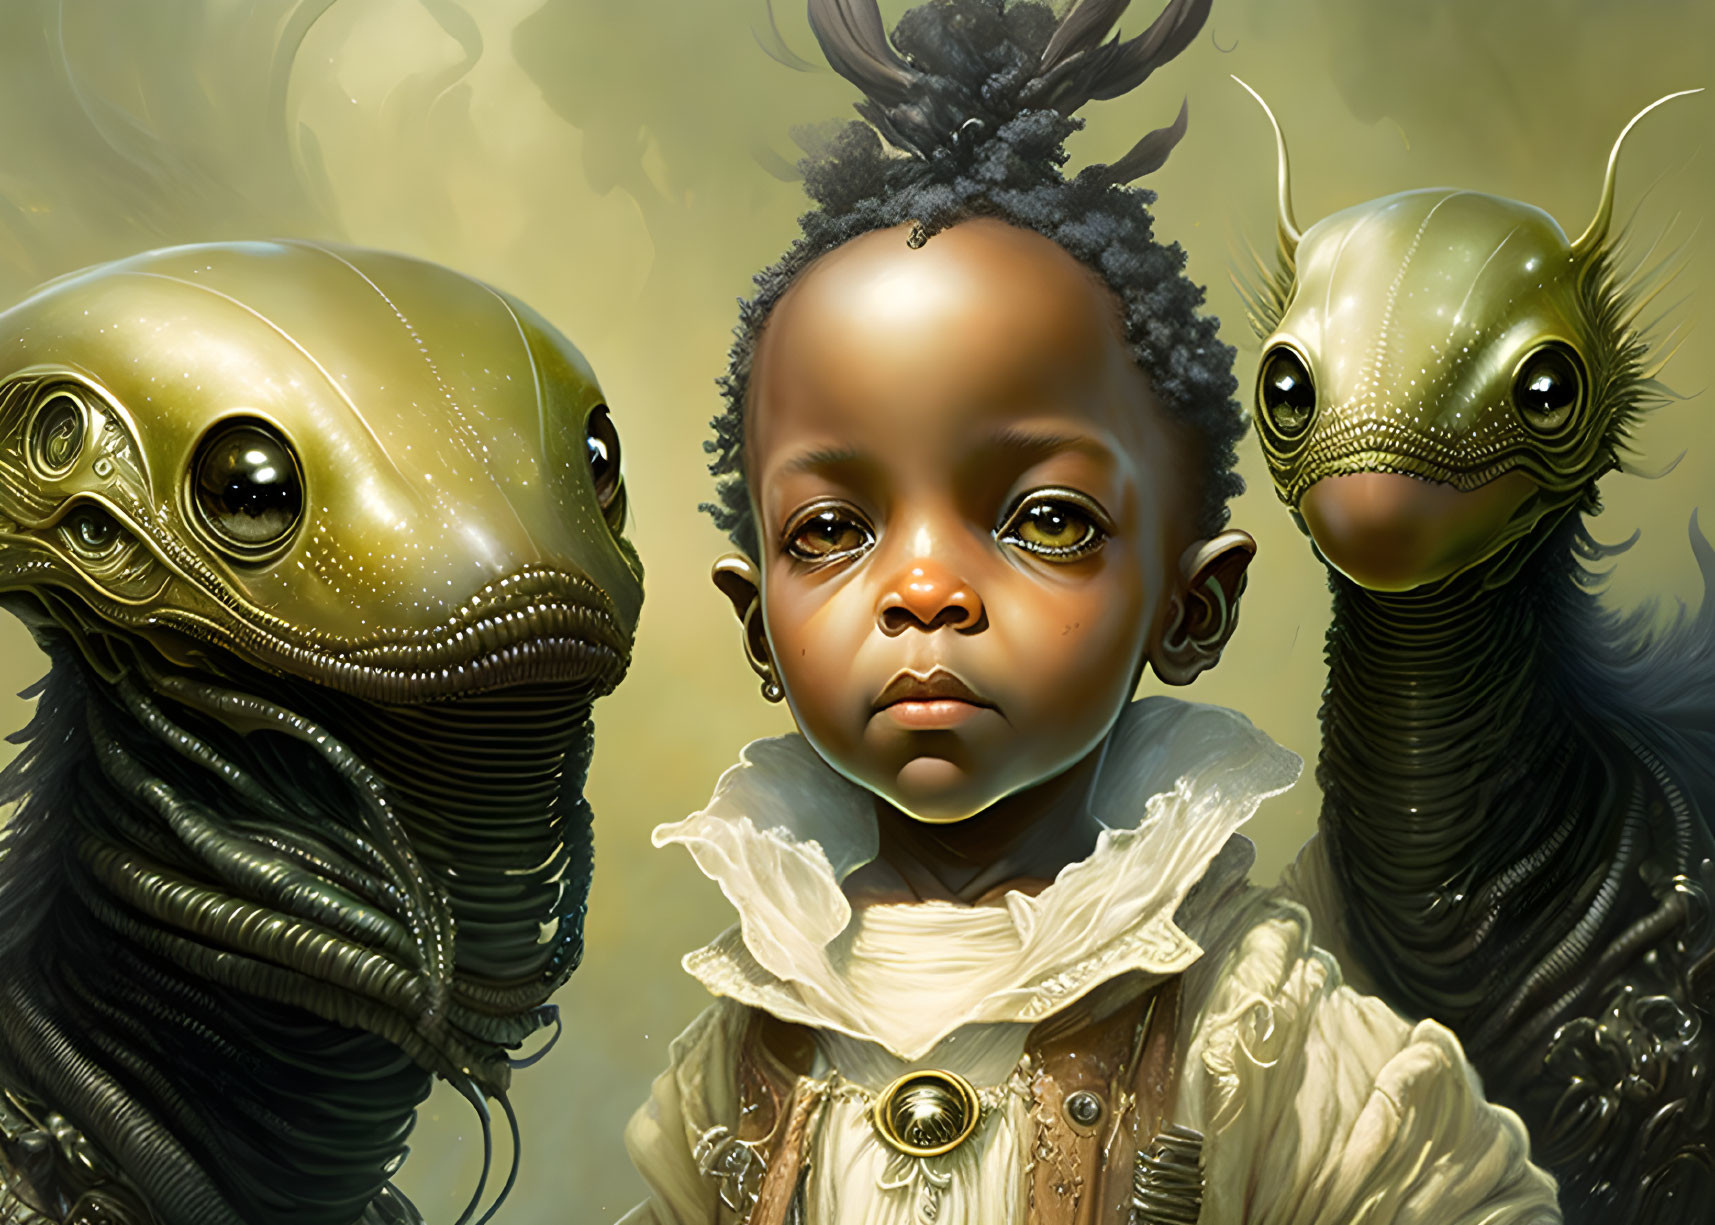 Child with intricate hairstyle and fantastical creatures with elongated heads and expressive eyes